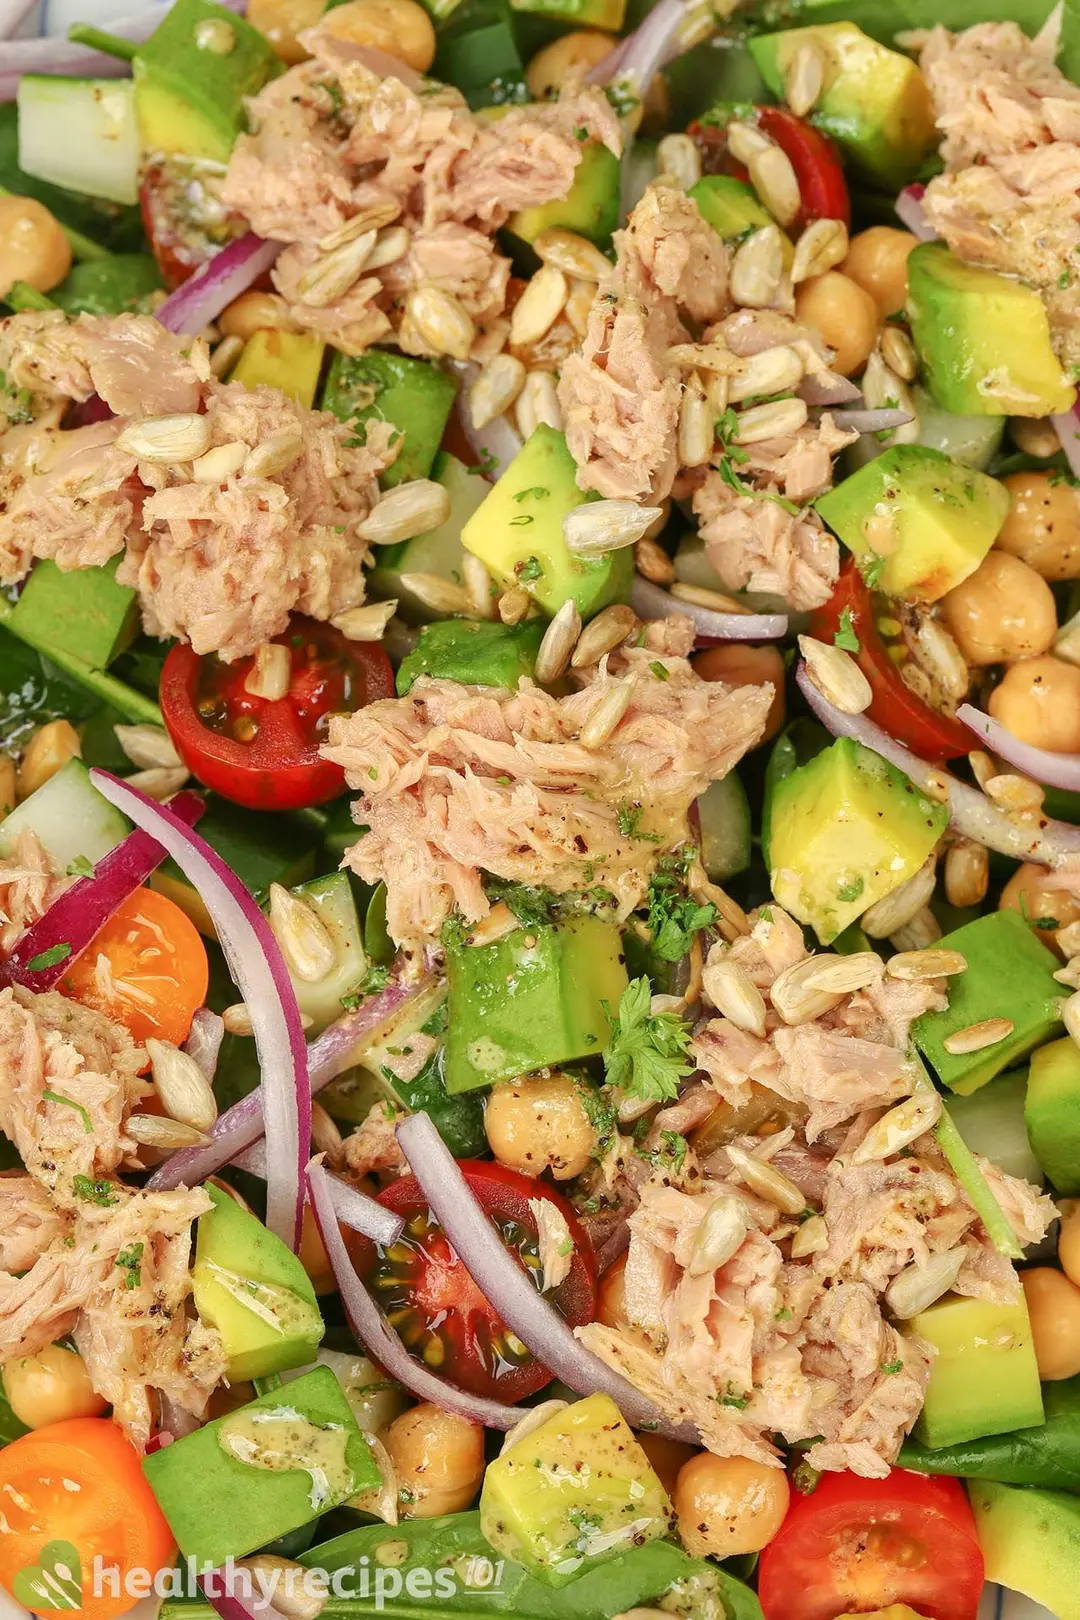 a close-up shot of avocado cubes and canned tuna decorated by sun flower seeds